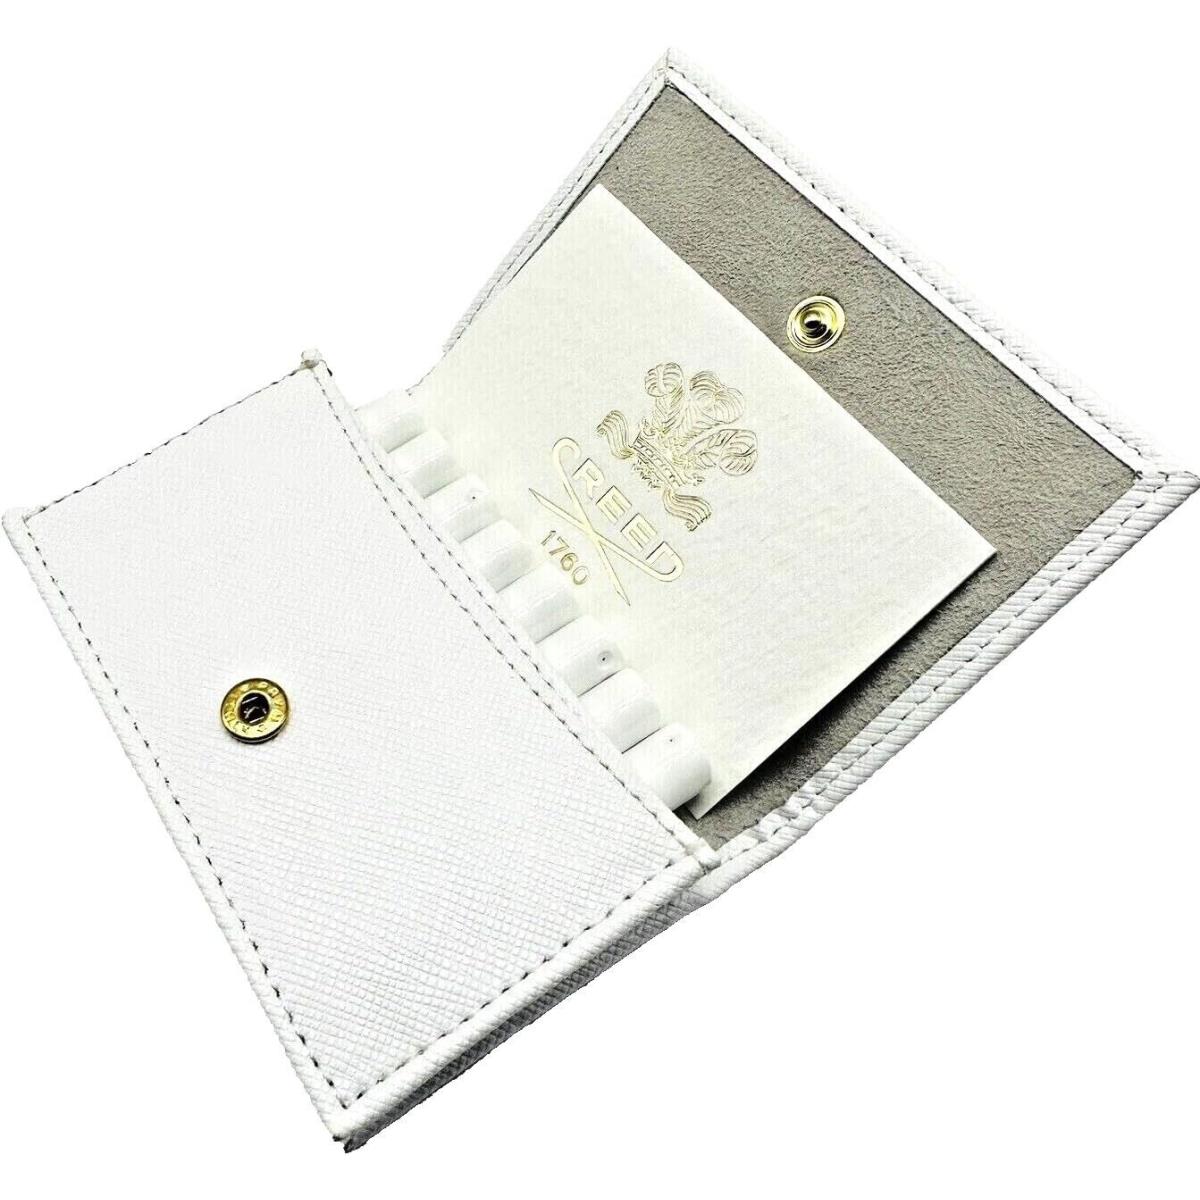 Creed Women s Luxury Fragrance White Leather Wallet 8 pc Vial Discovery Set